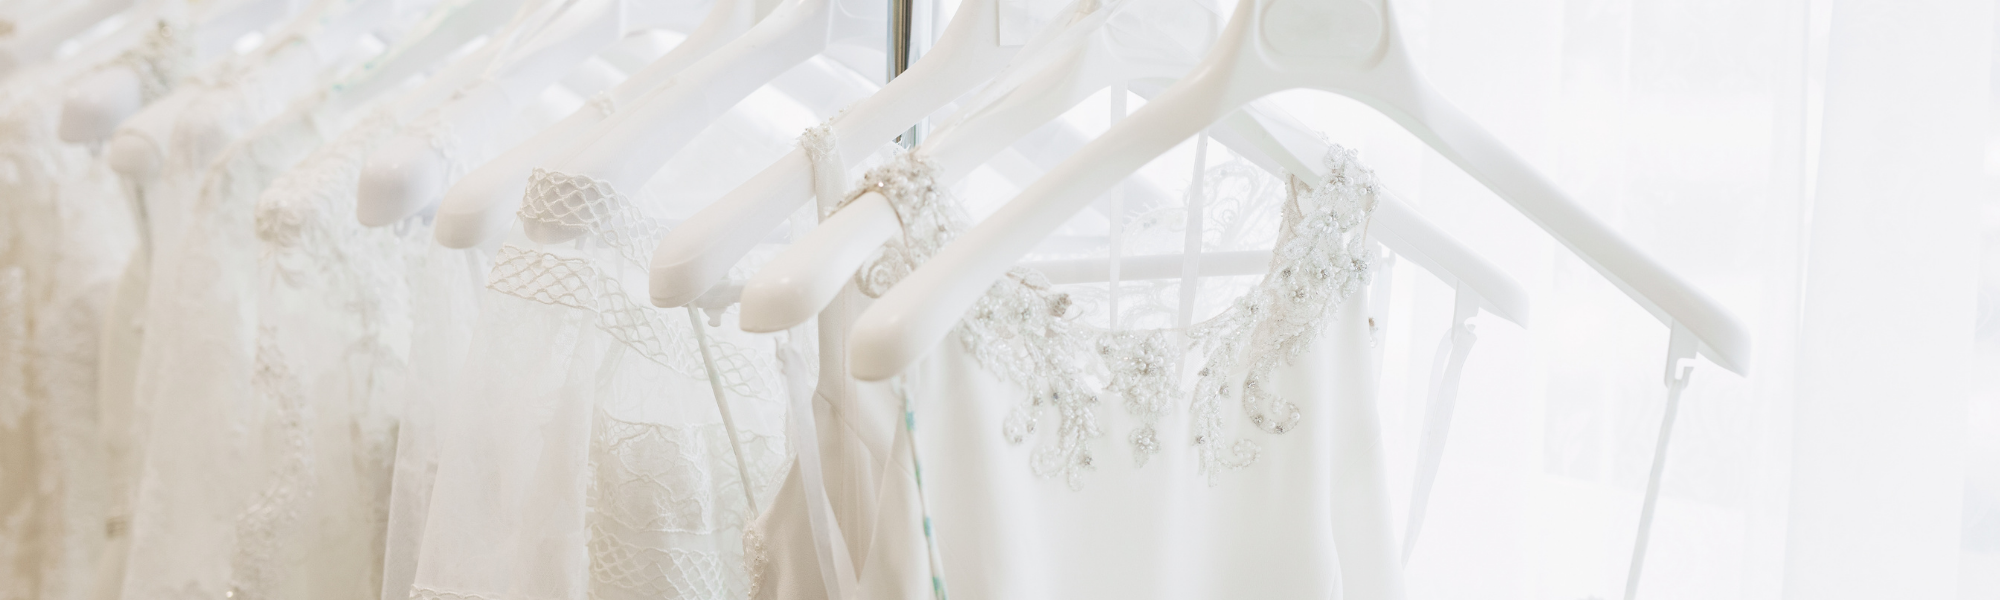 wedding gowns on a rack 